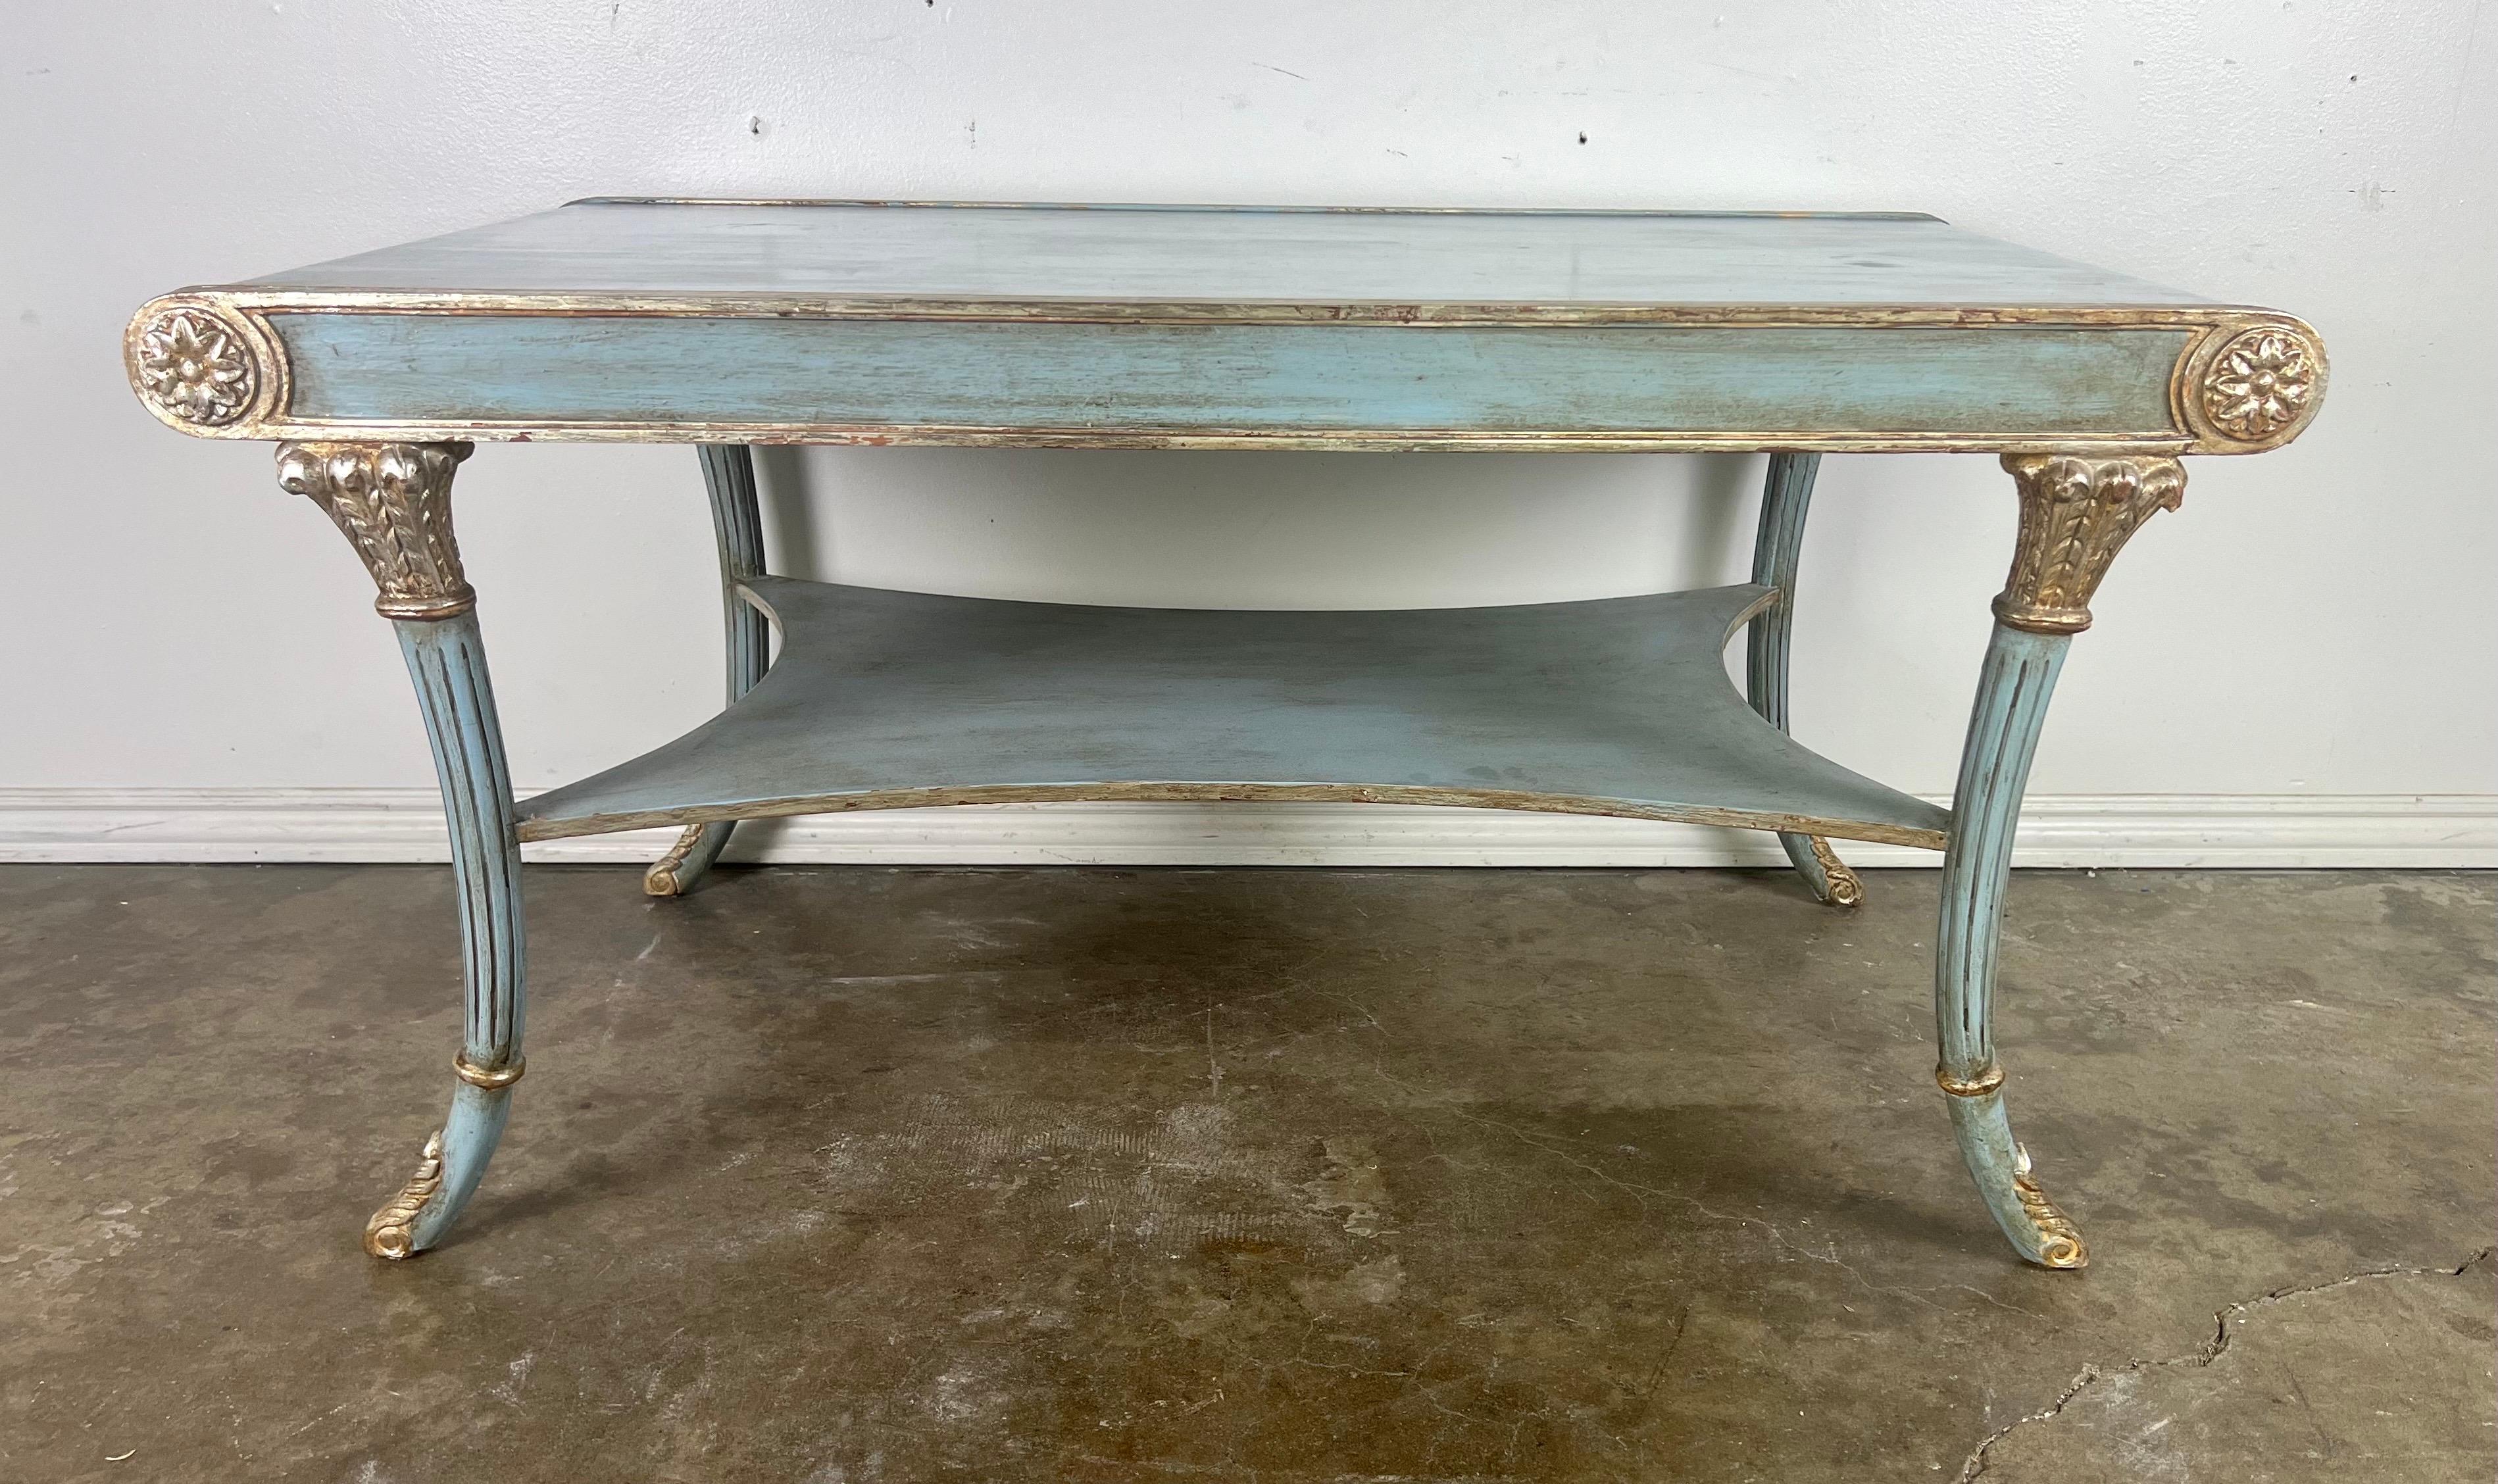 This 1980's Italian Regency style tea table designed by Nancy Corzine beautifully encapsulates the elegance and grace of its era and design influences.  The soft blue coloration provides a gentle, inviting appearance, which is elegantly offset by